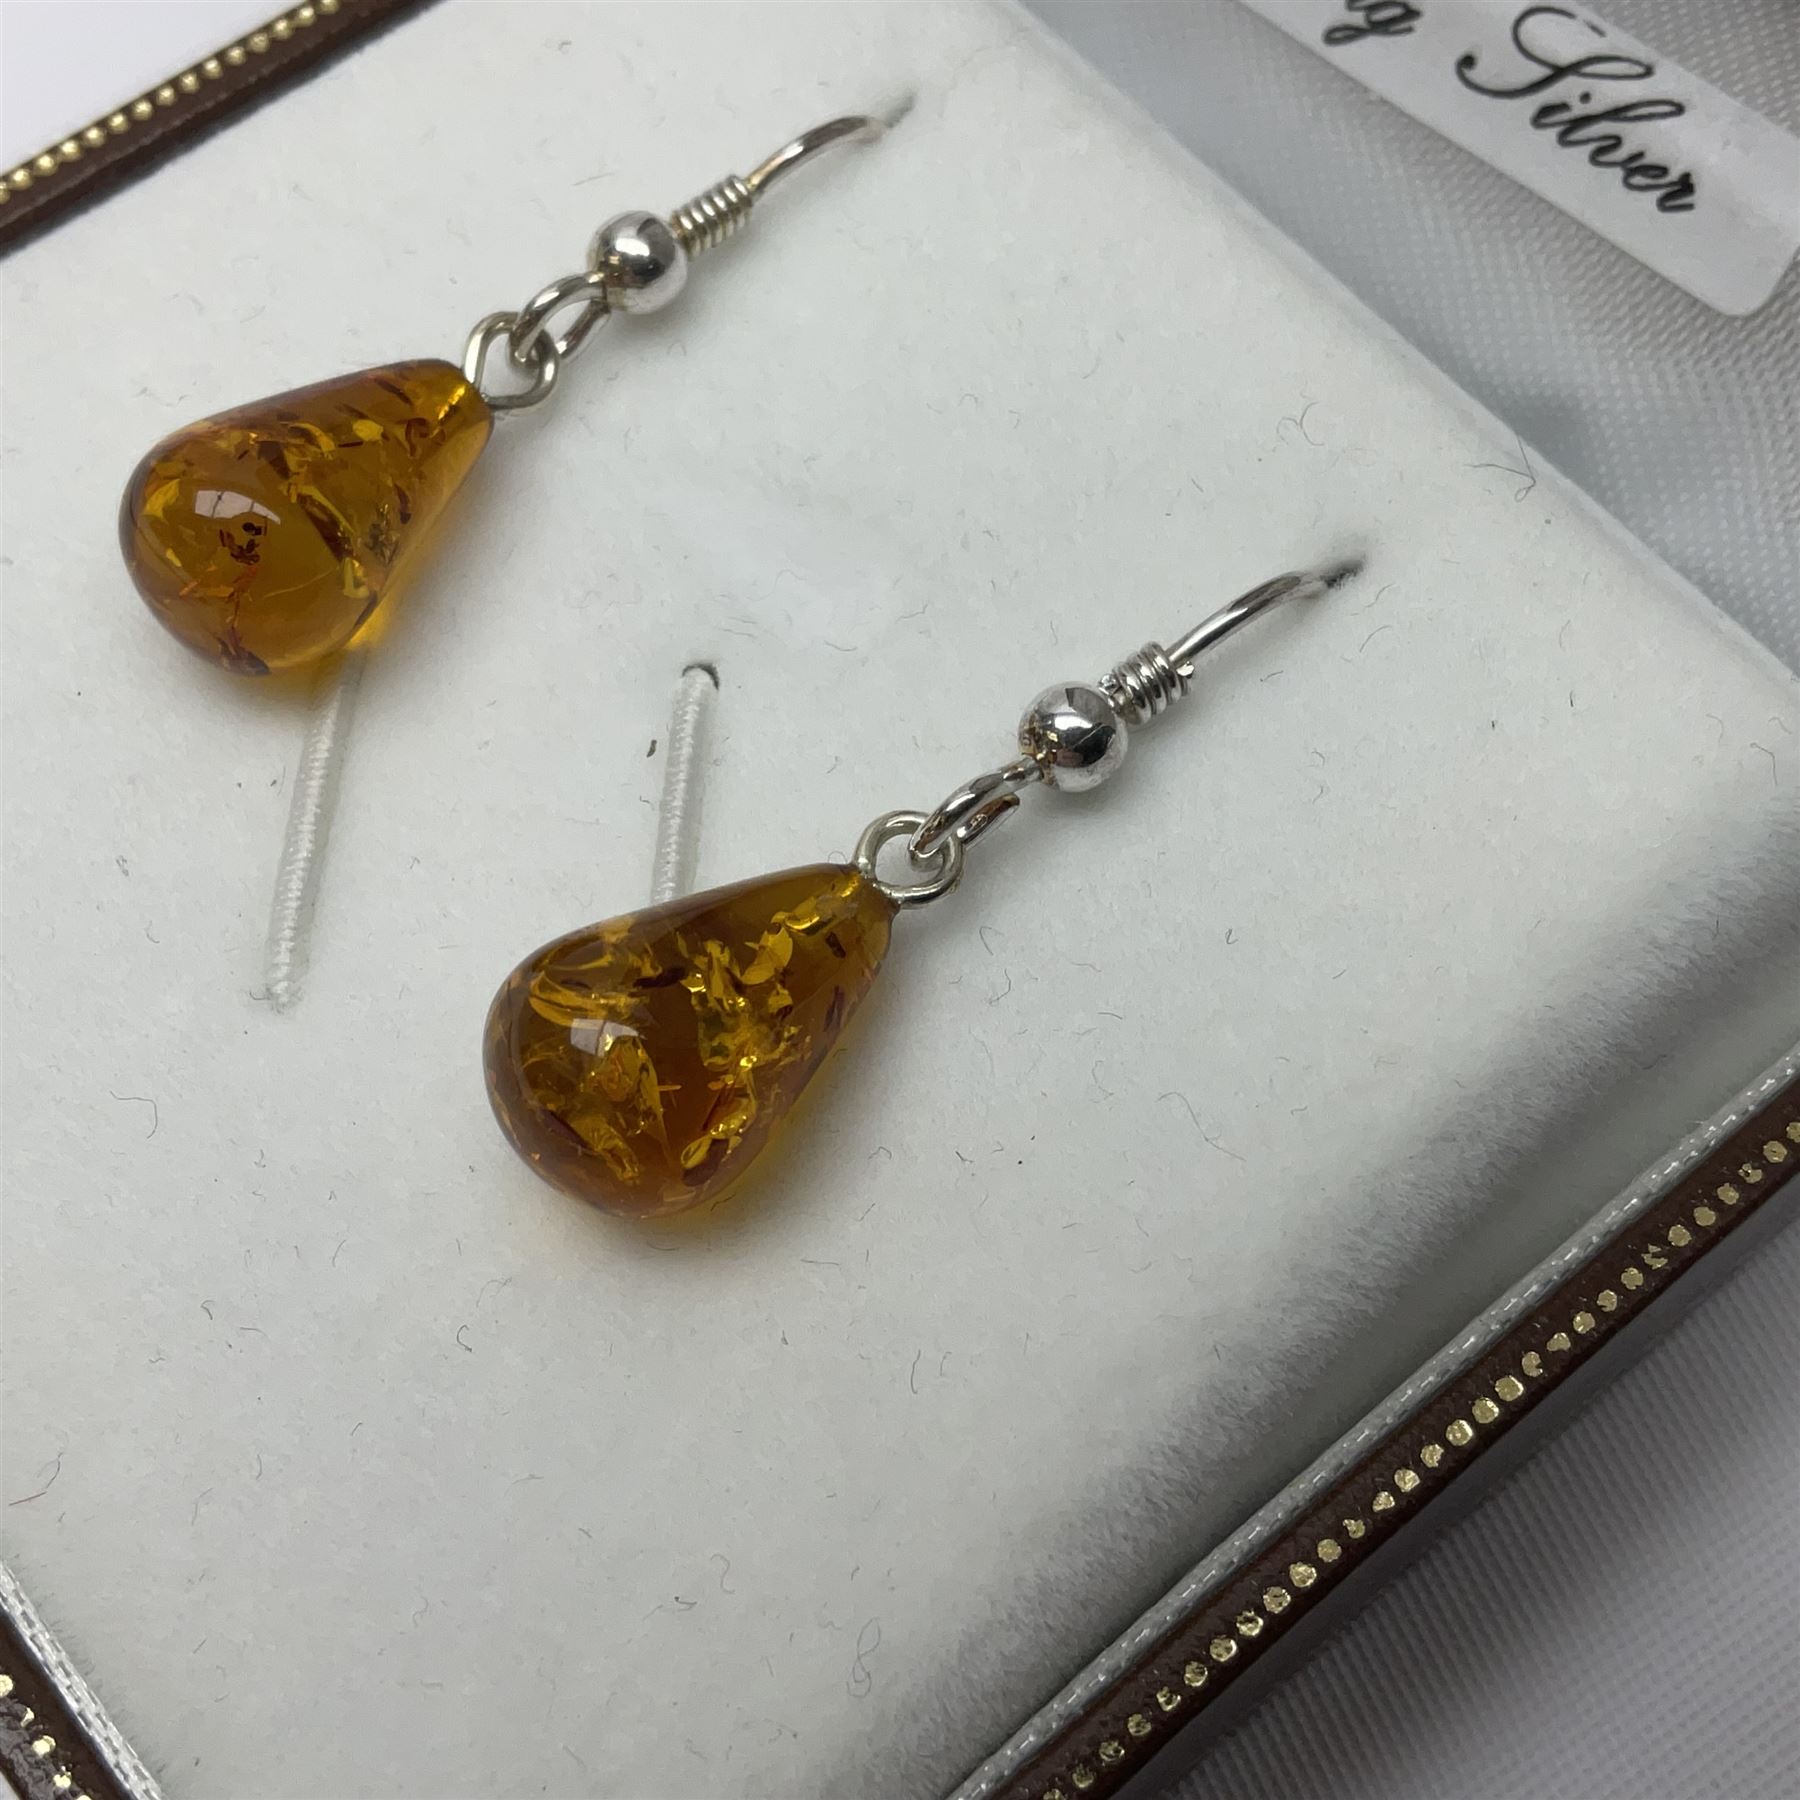 Pair of silver Baltic amber pendant earrings - Image 3 of 3